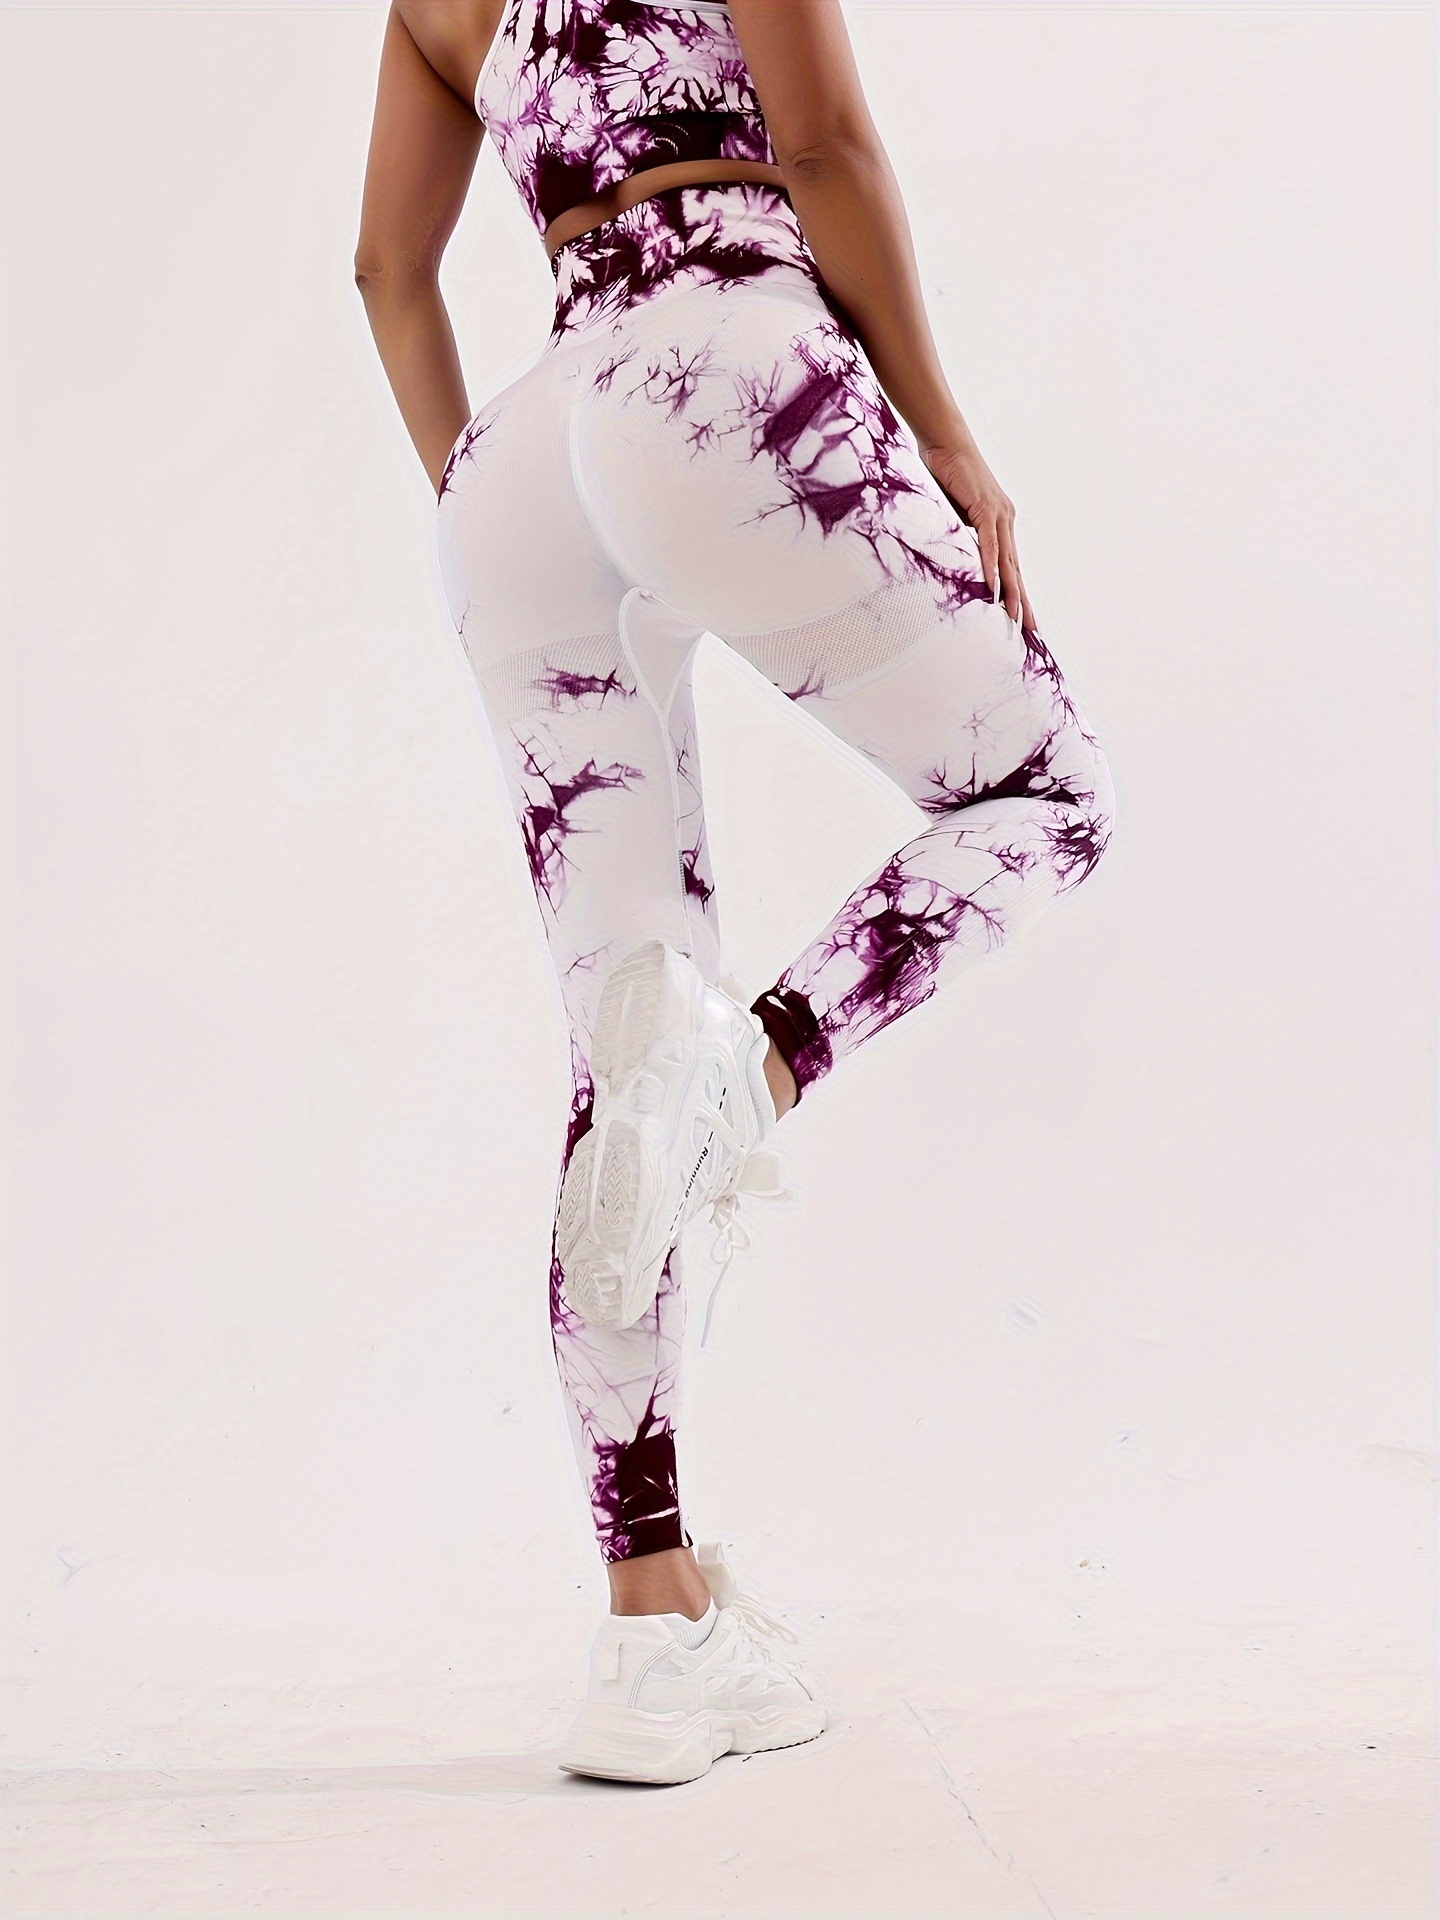 Women's Tie Dye Yoga Outfits 2 Piece Set High Waist Leggings and